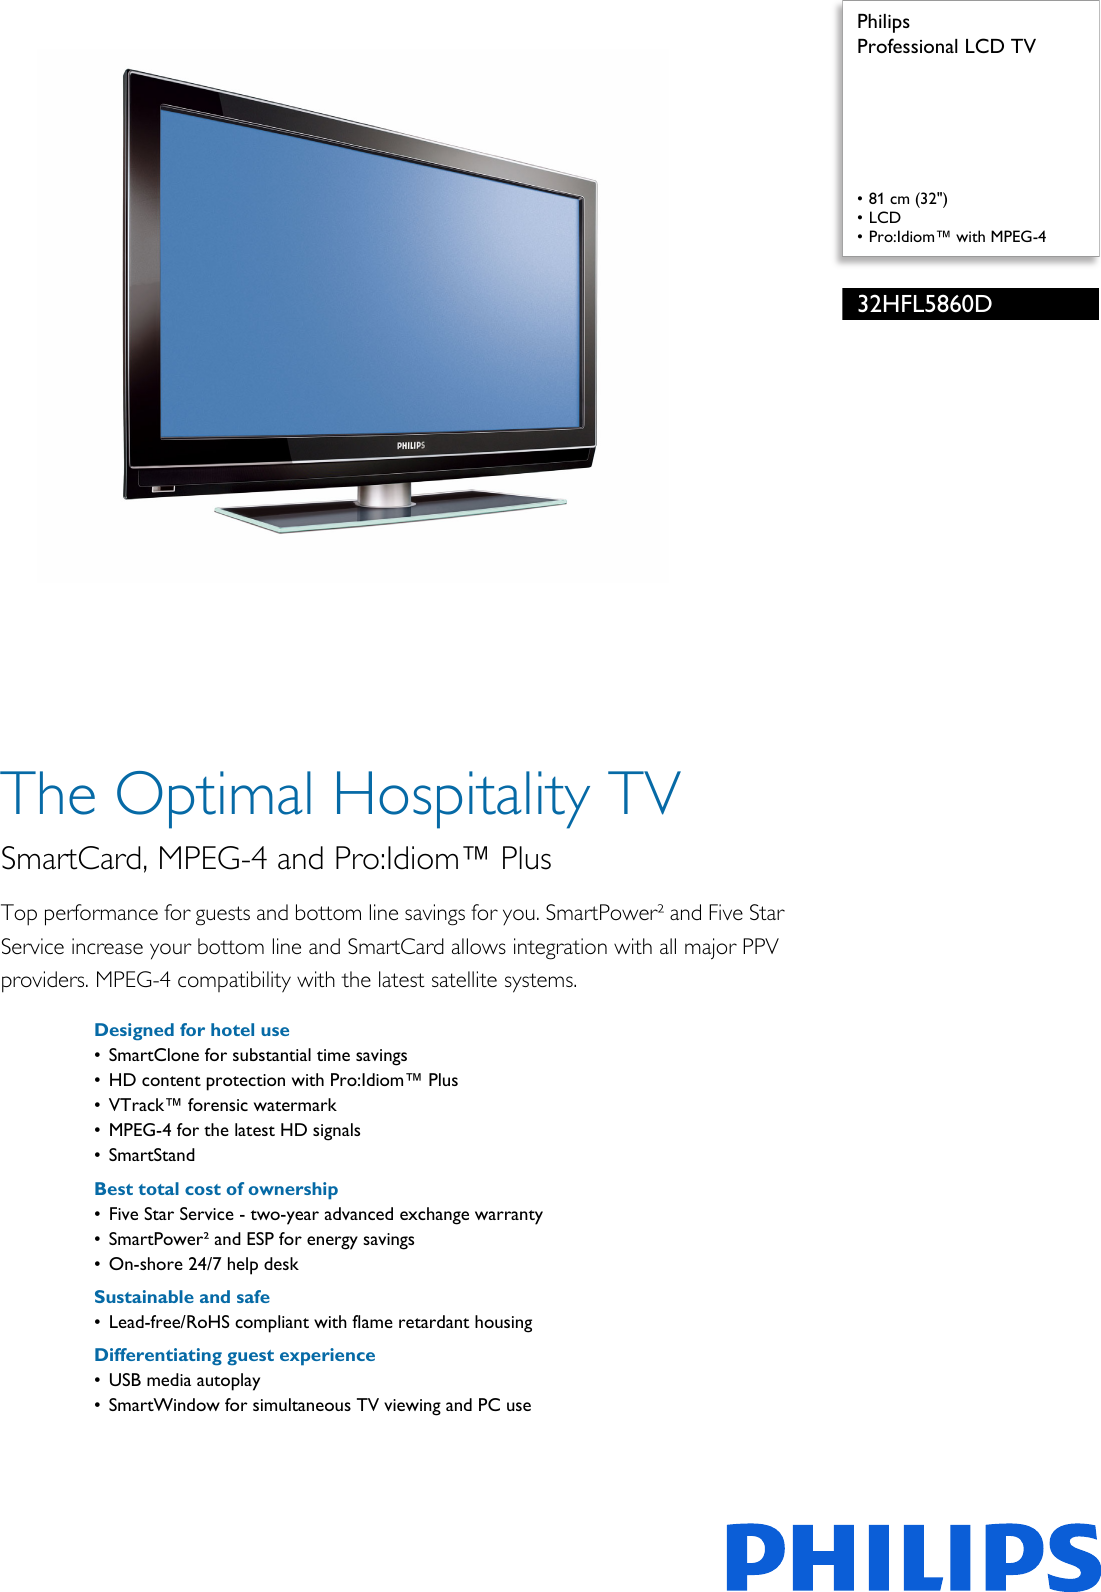 Page 1 of 3 - Philips 32HFL5860D/27 Professional LCD TV User Manual Leaflet 32hfl5860d 27 Pss Aenus